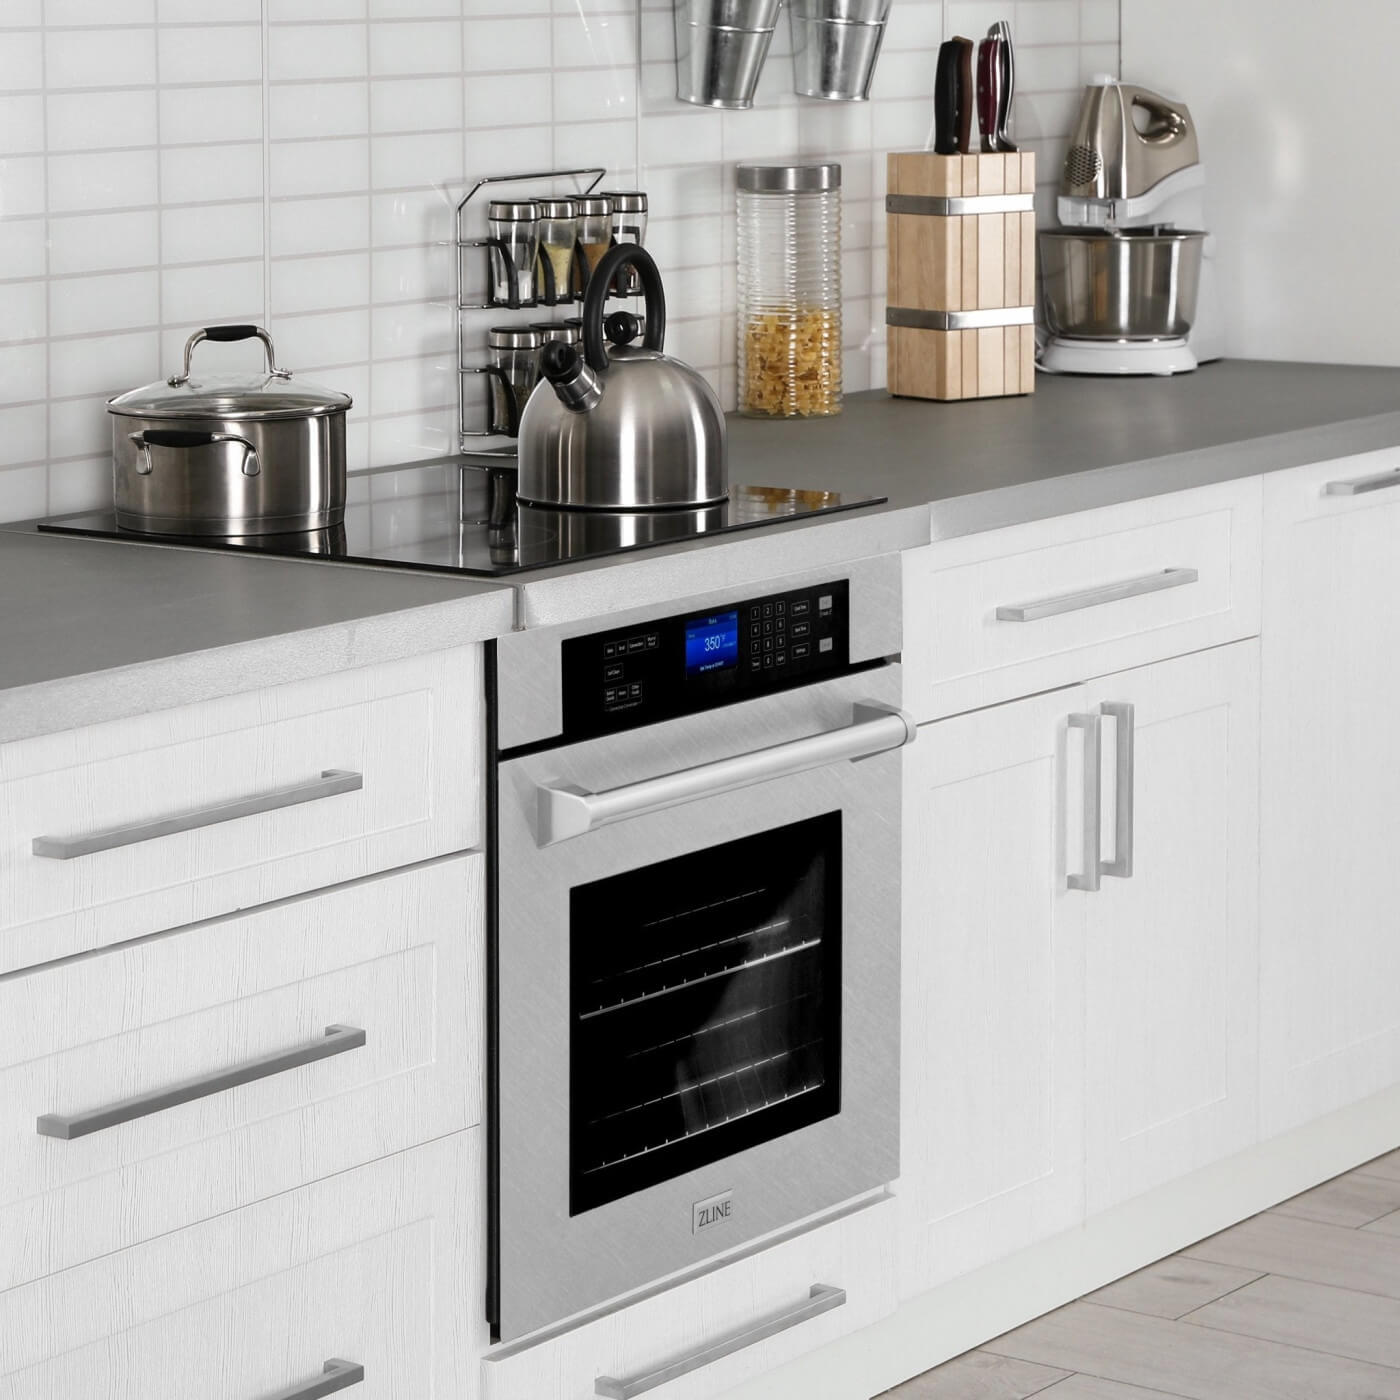 ZLINE Single Wall oven below an induction cooktop.